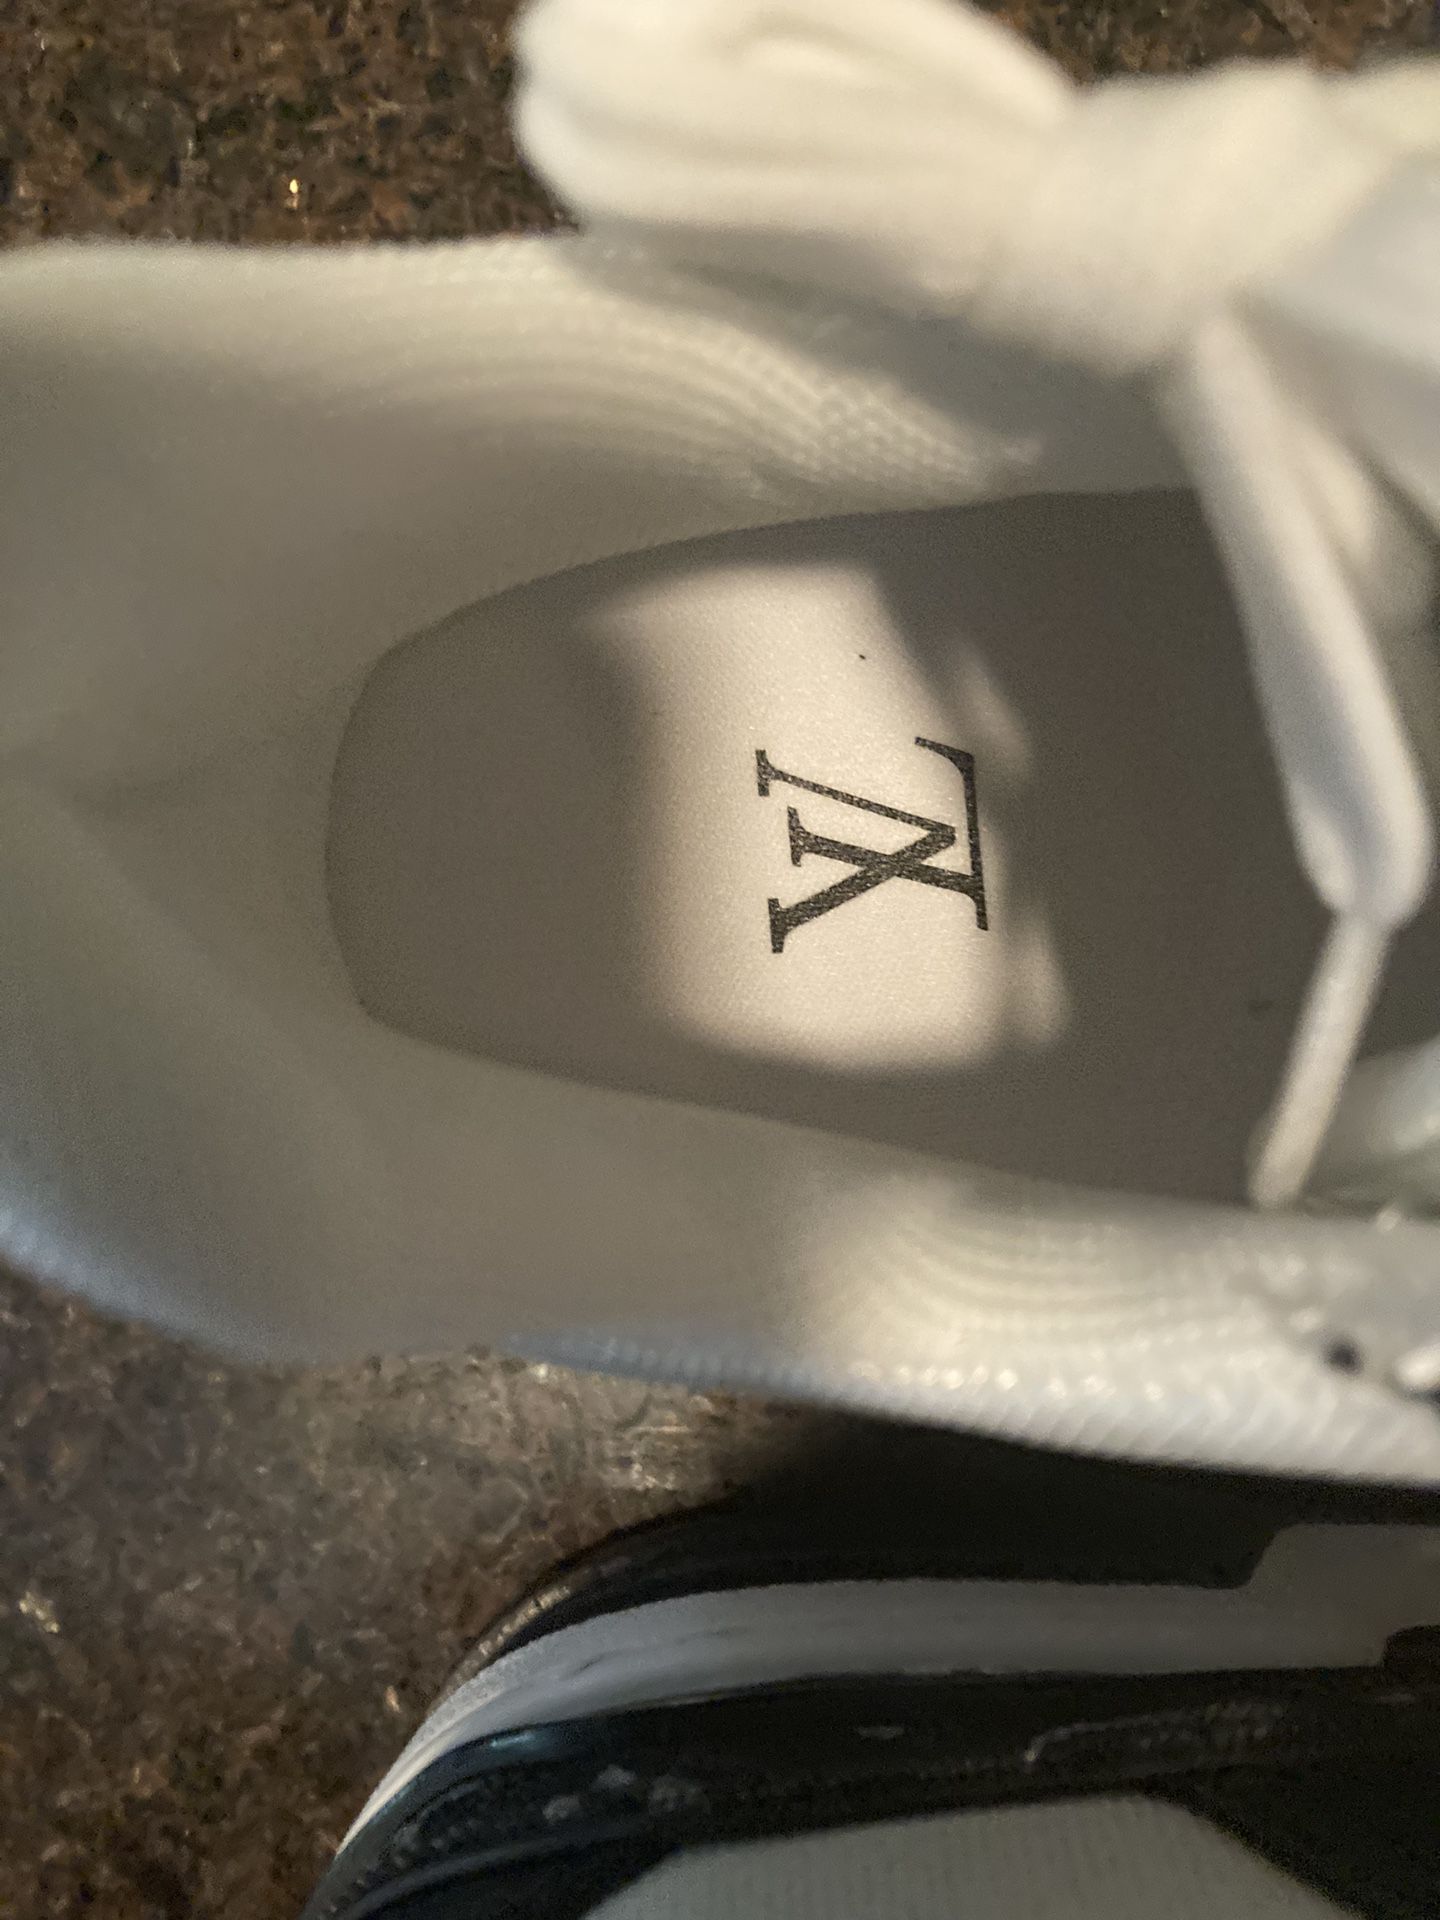 Louis Vuitton Trainers 11 for Sale in Sauk Village, IL - OfferUp